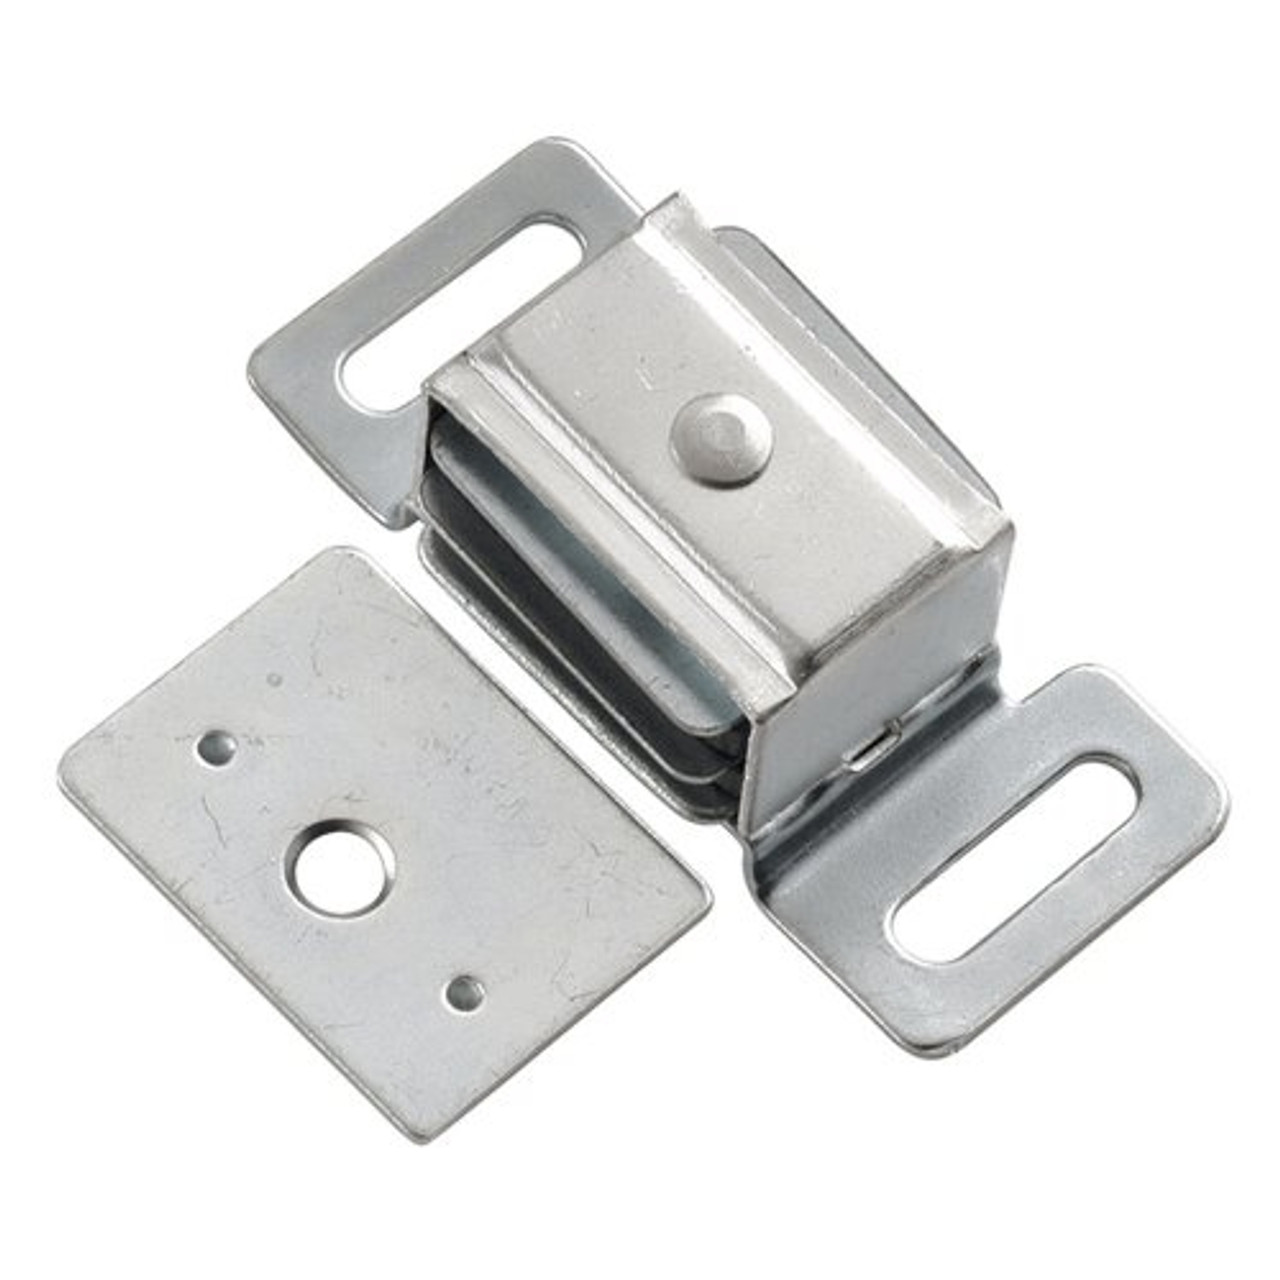 Hickory Hardware 1-7/8" CADMIUM DOUBLE STACK MAGNETIC CATCH